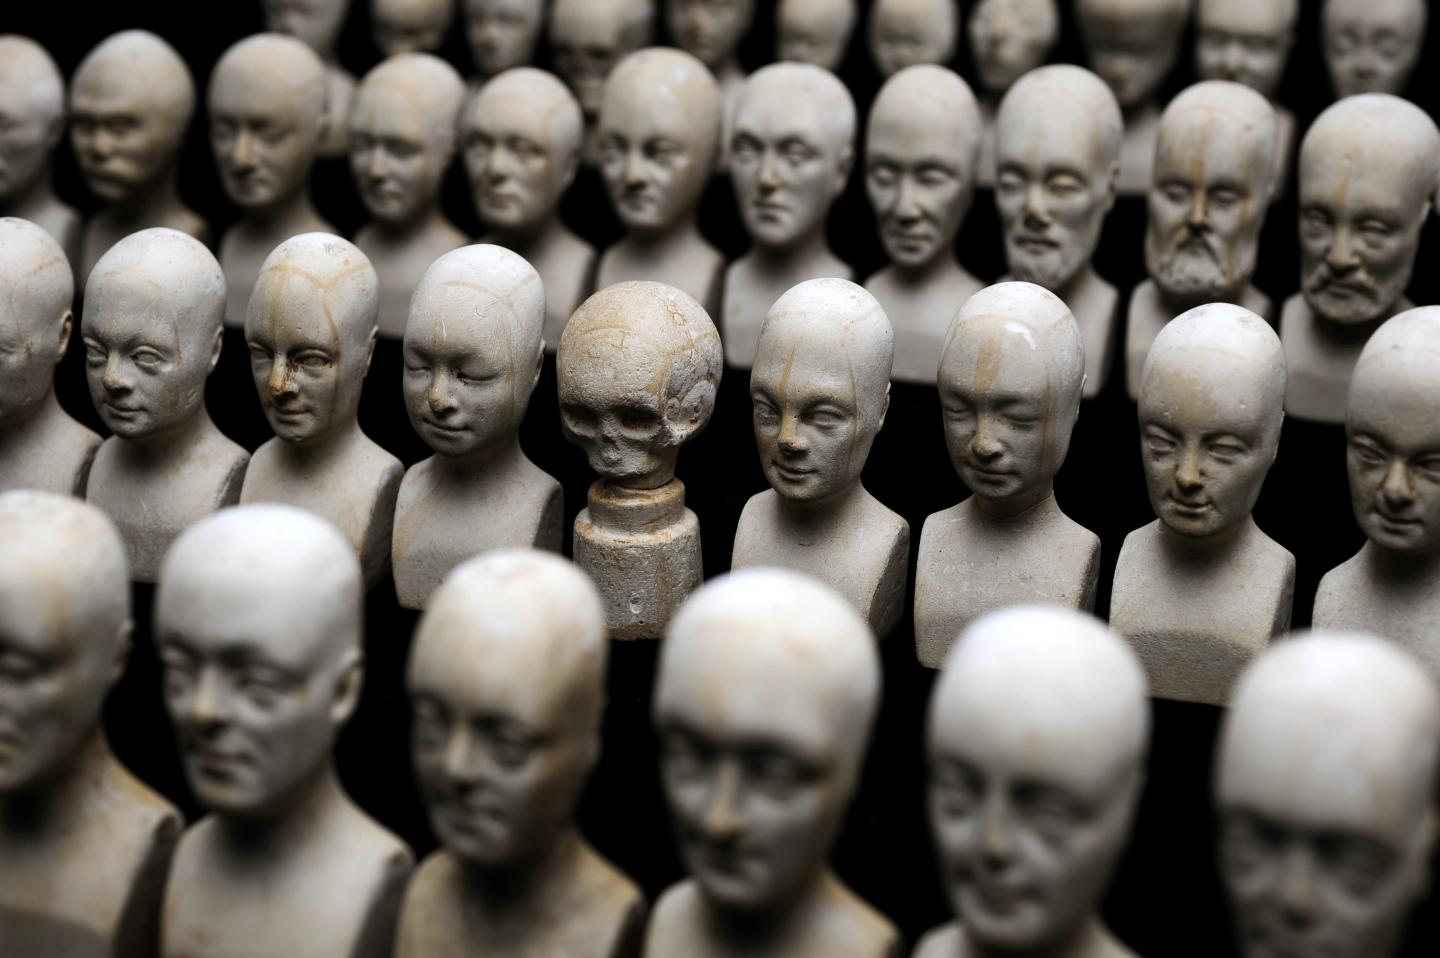 Set of Sixty Miniature Heads used in Phrenology